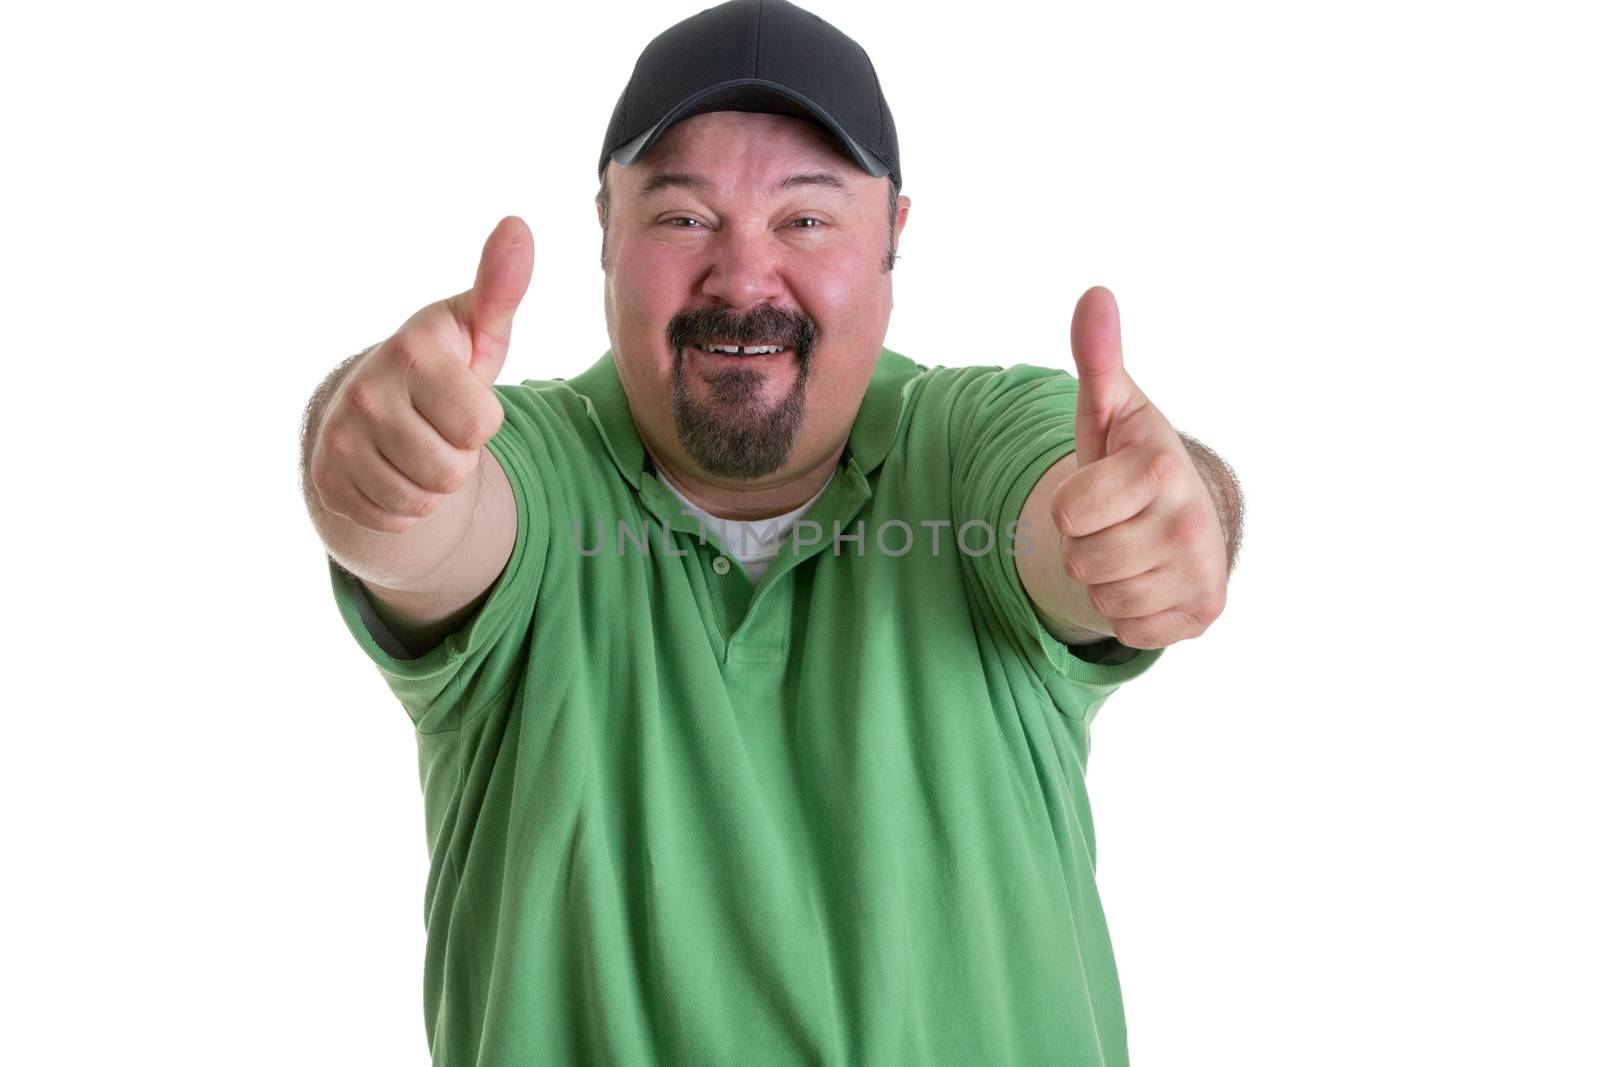 Portrait of Overweight Man with Goatee Wearing Green Shirt and Black Baseball Cap Smiling and Giving Thumbs Up Hand Gesture Toward Camera, on White Background